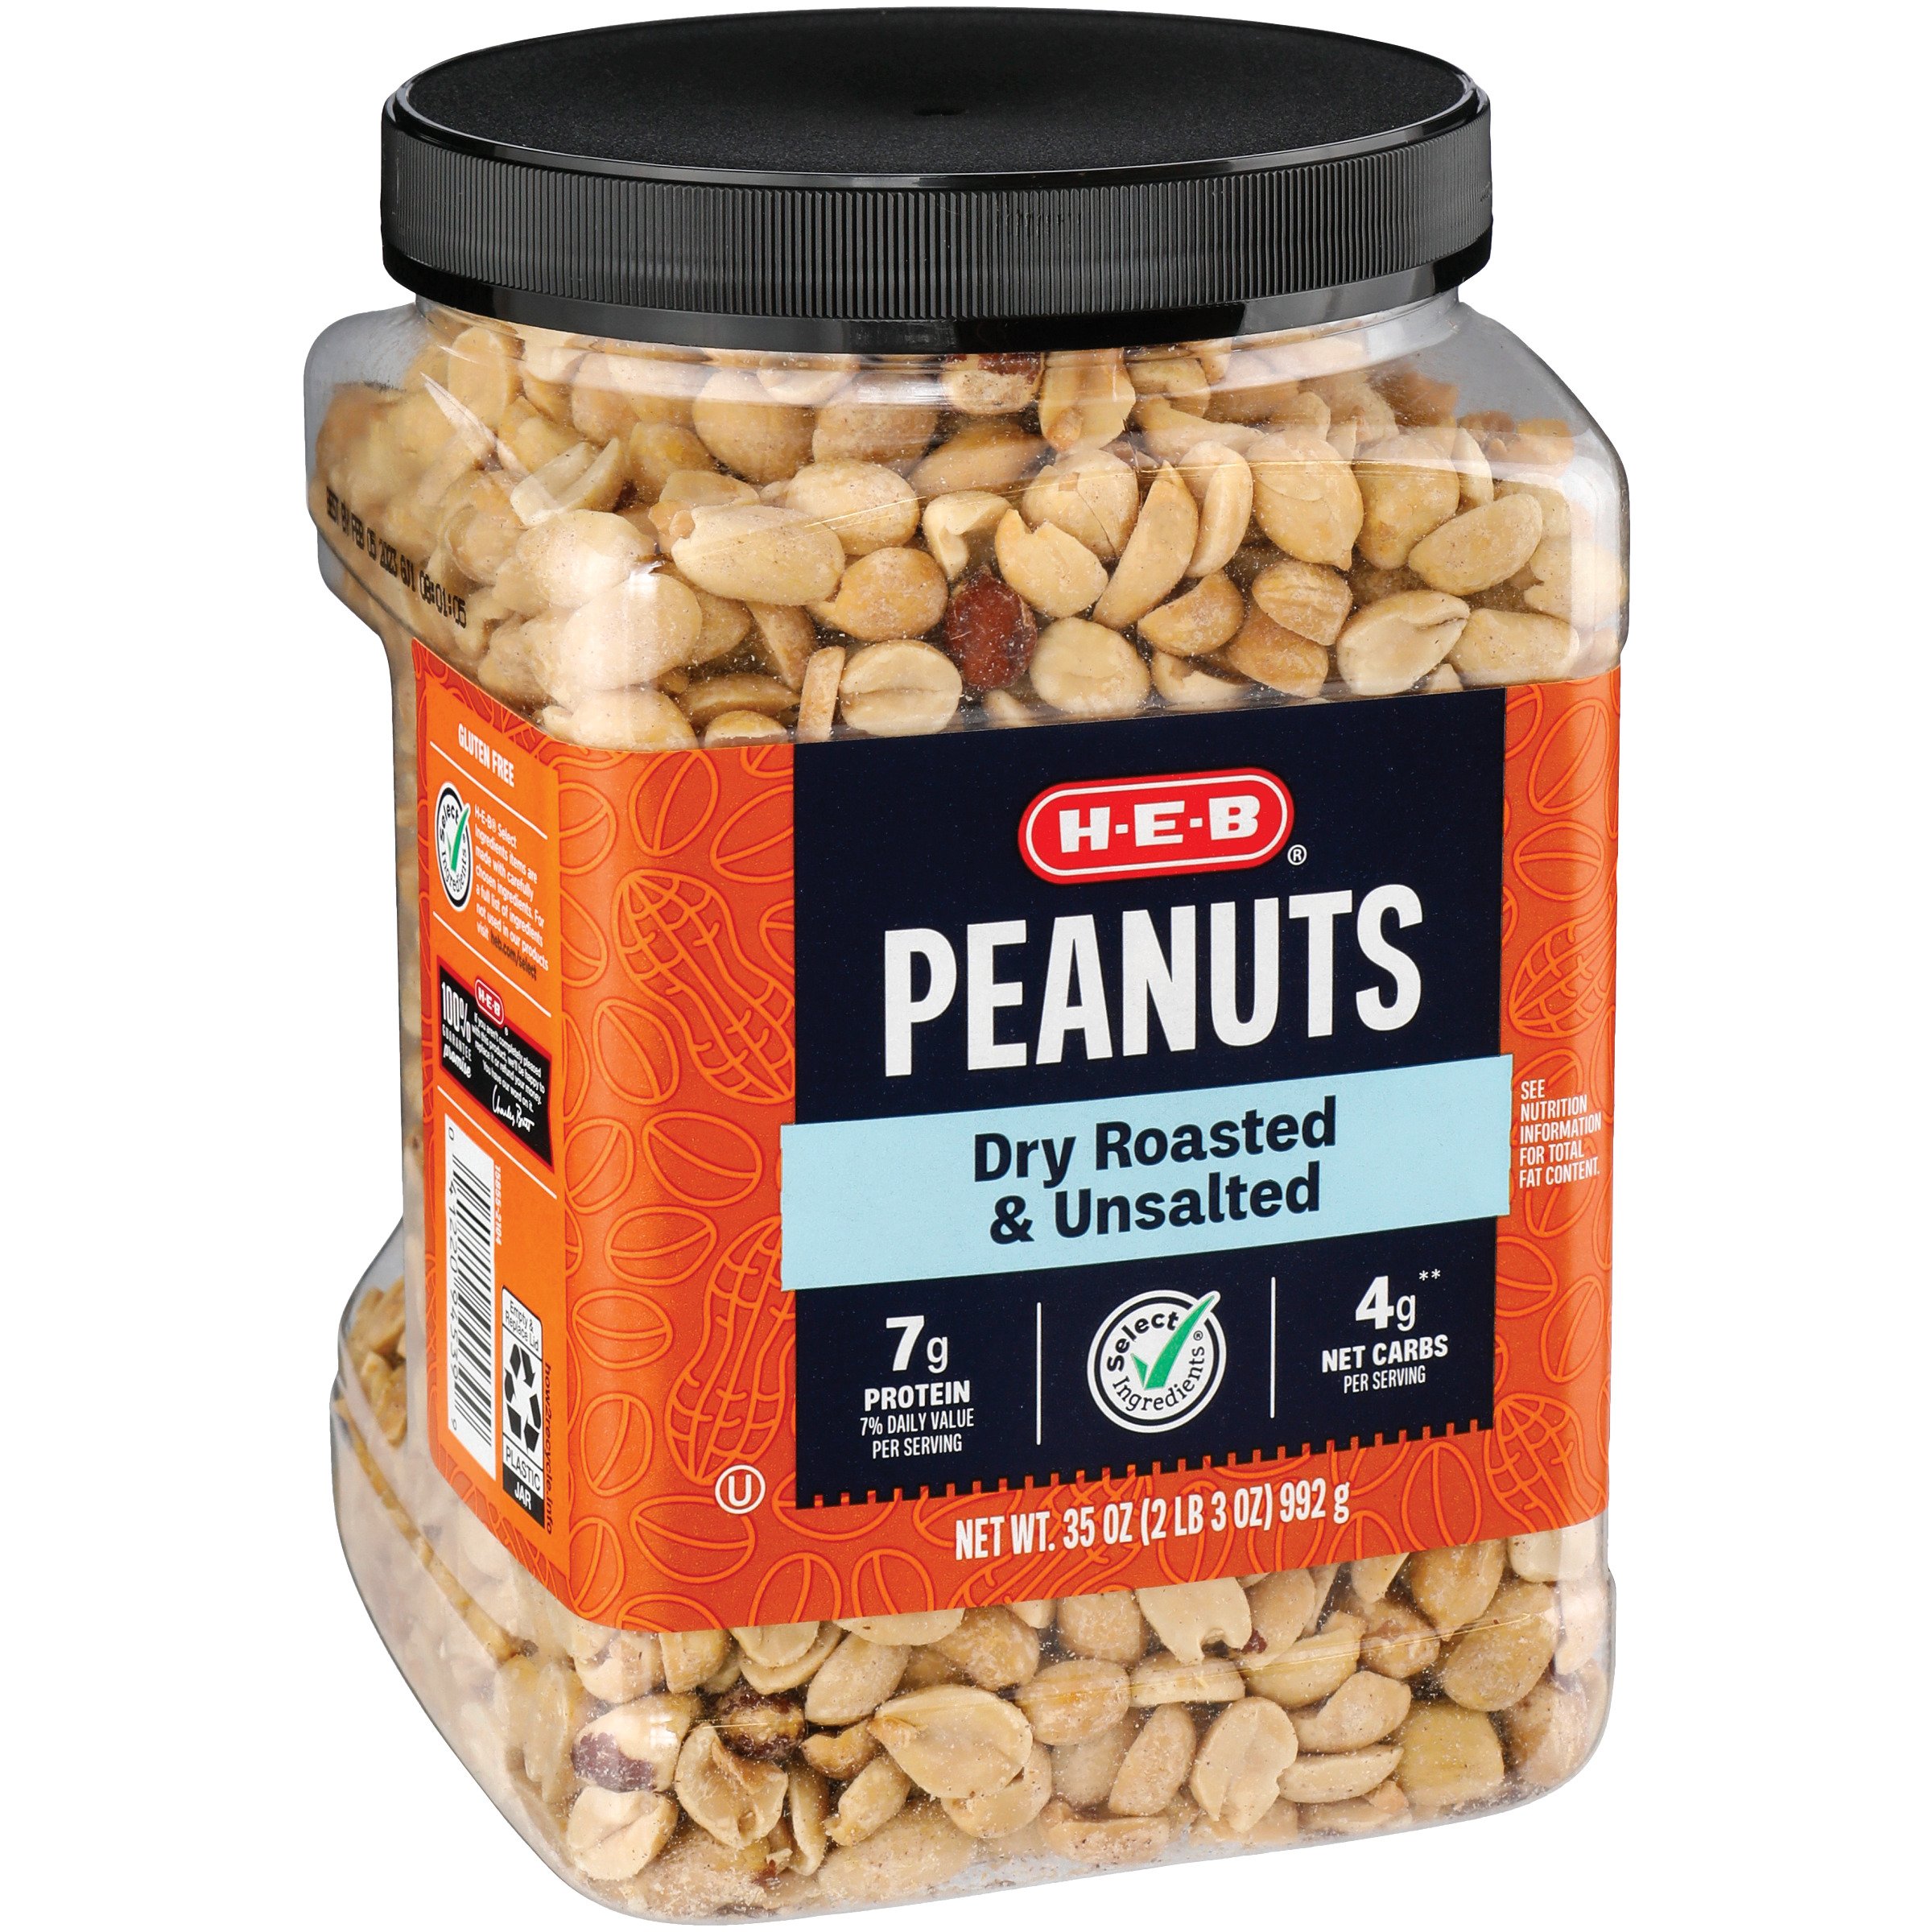 are dogs allowed dry roasted peanuts